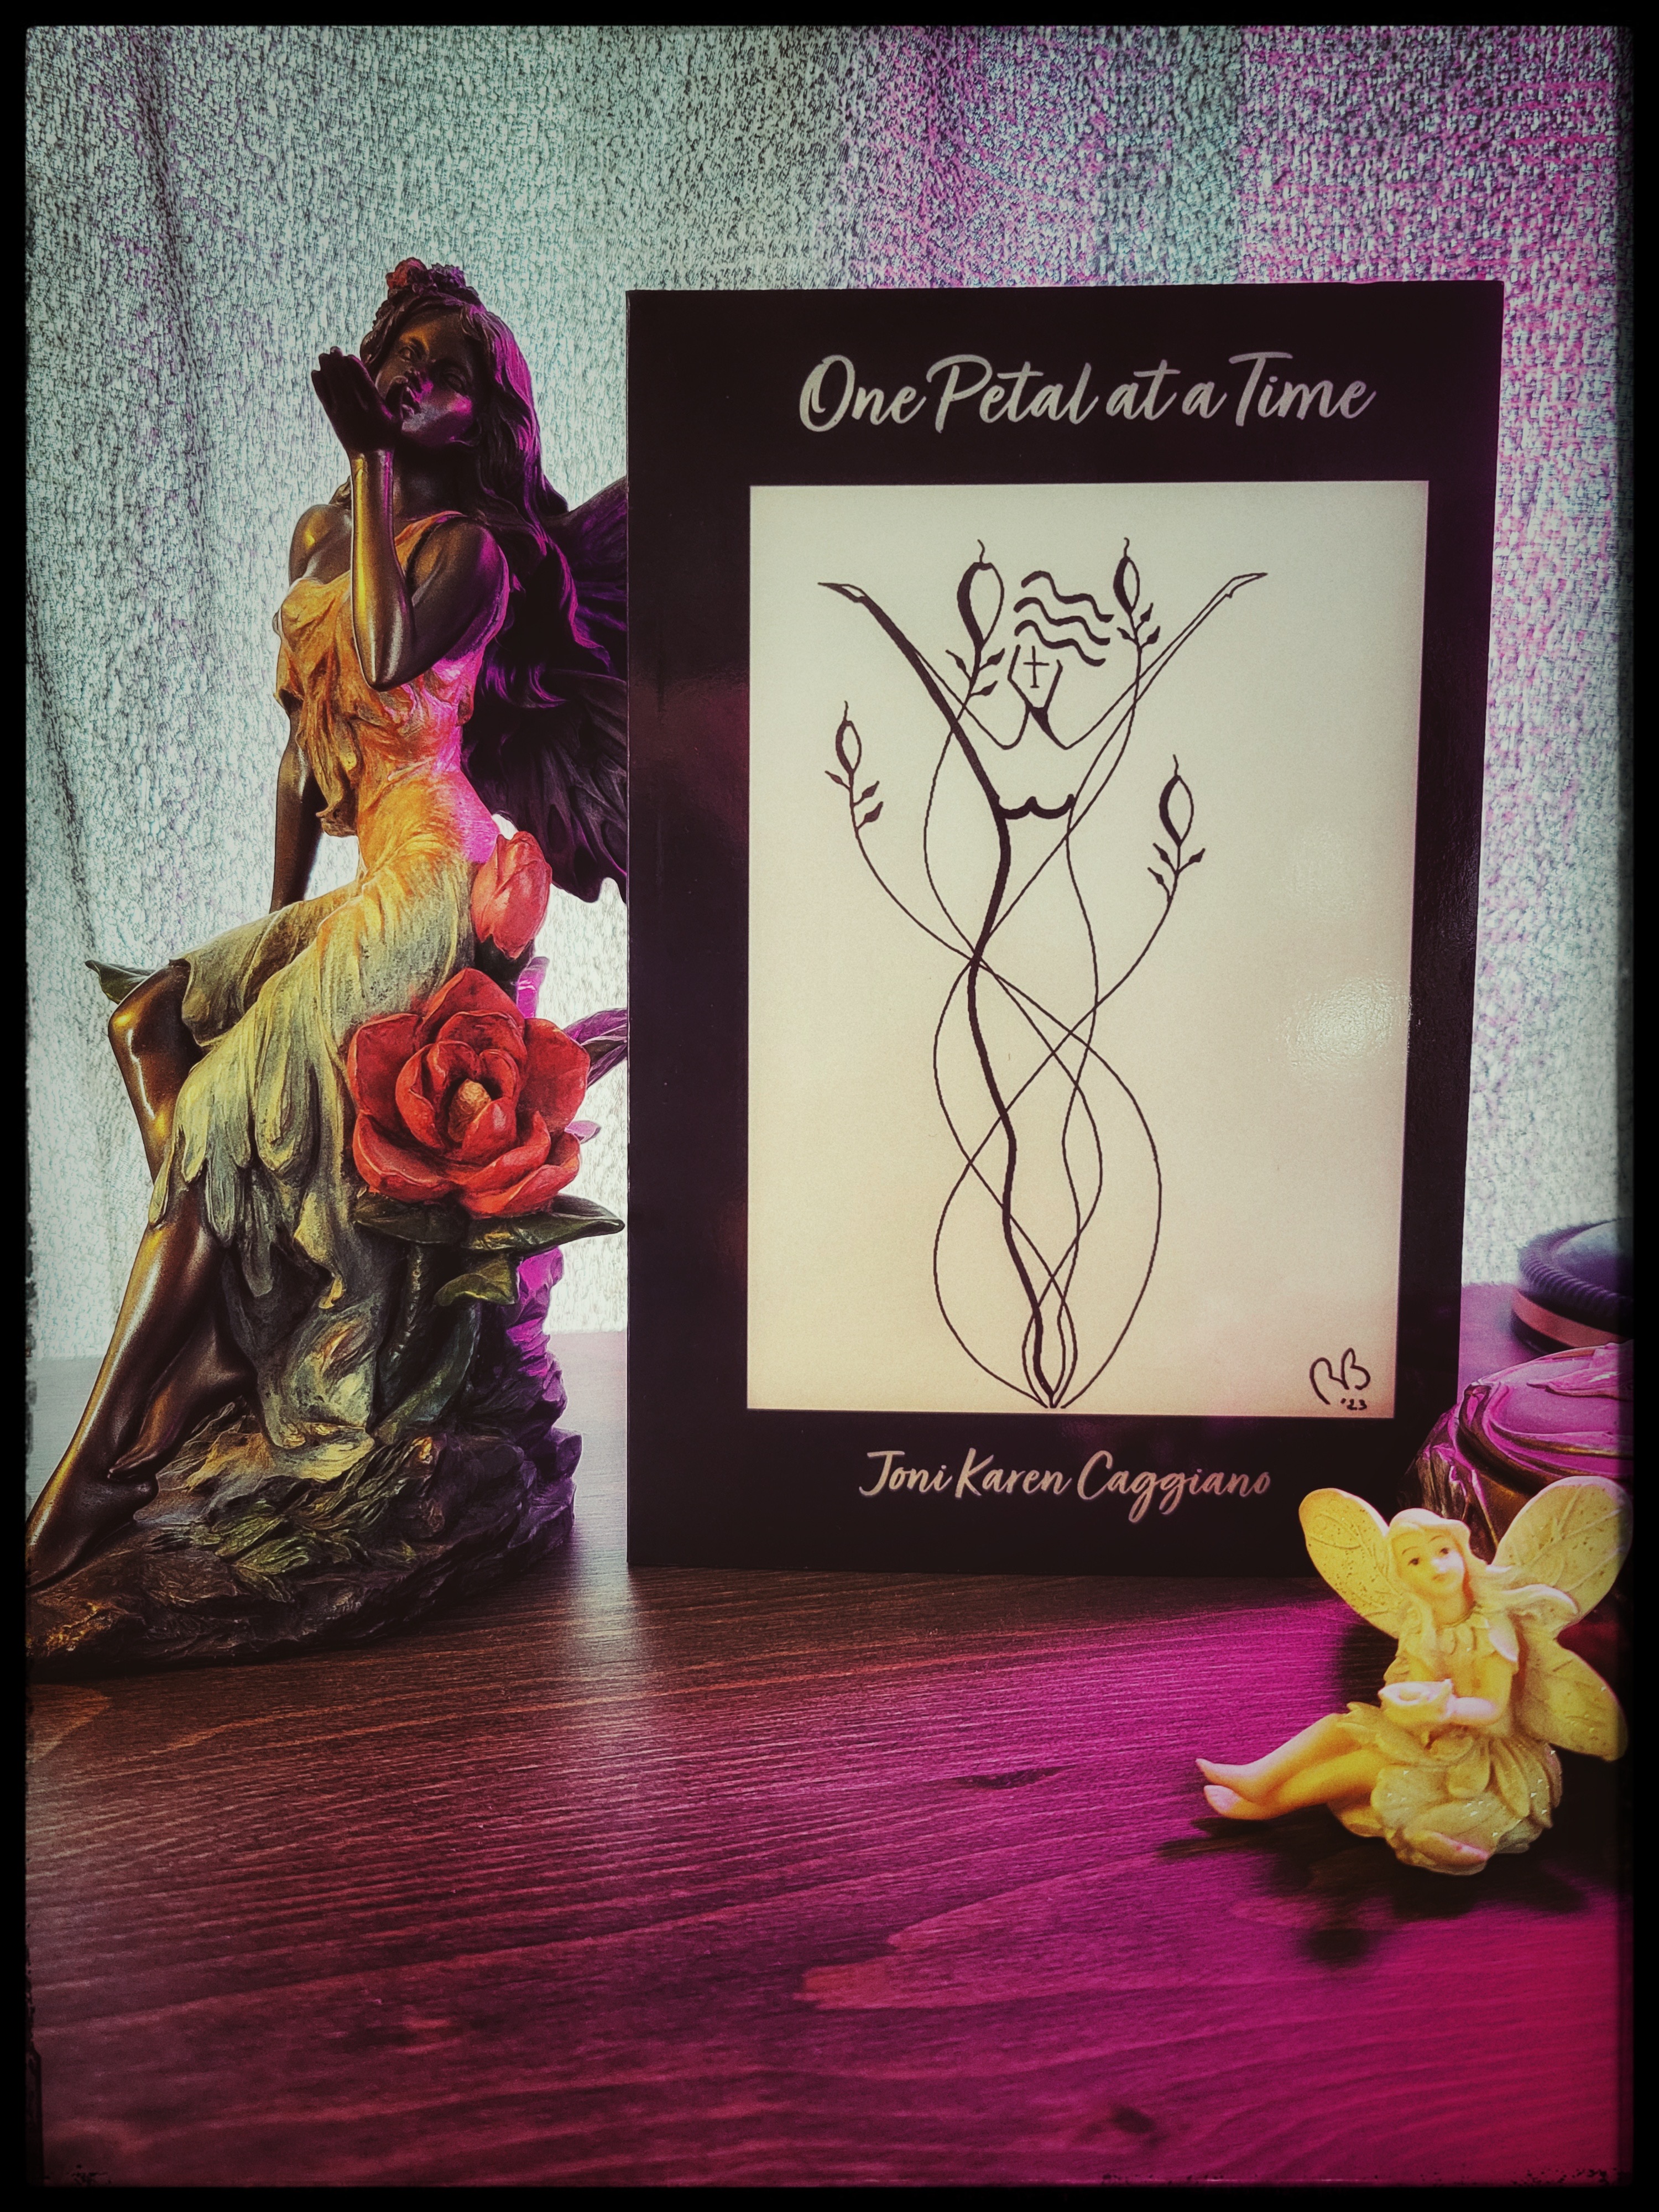 “Review of Joni Caggiano’s One Petal at a Time” by Myriam DesCendres